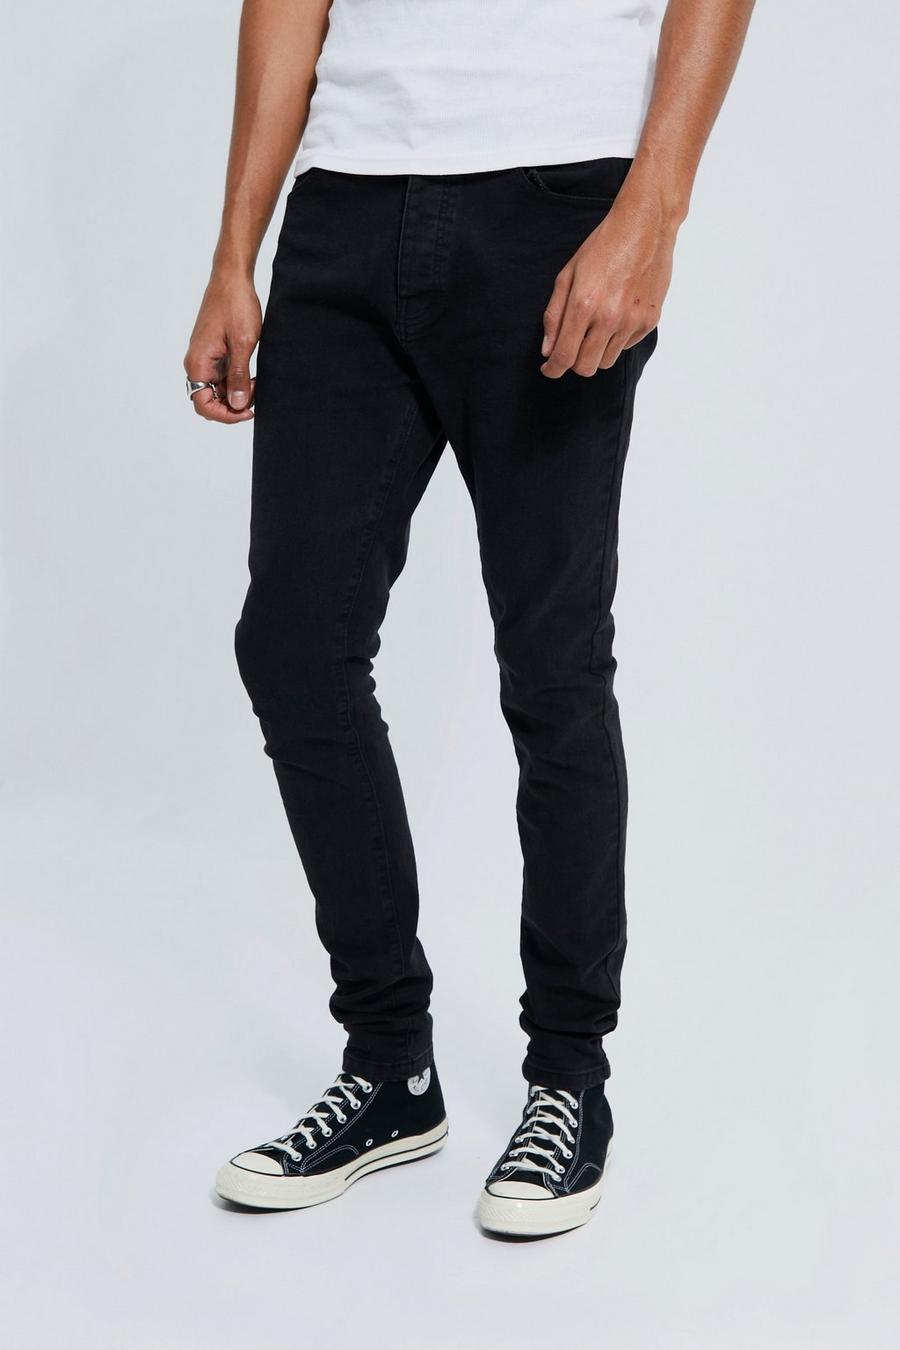 Washed black Tall Stretch Skinny Jeans